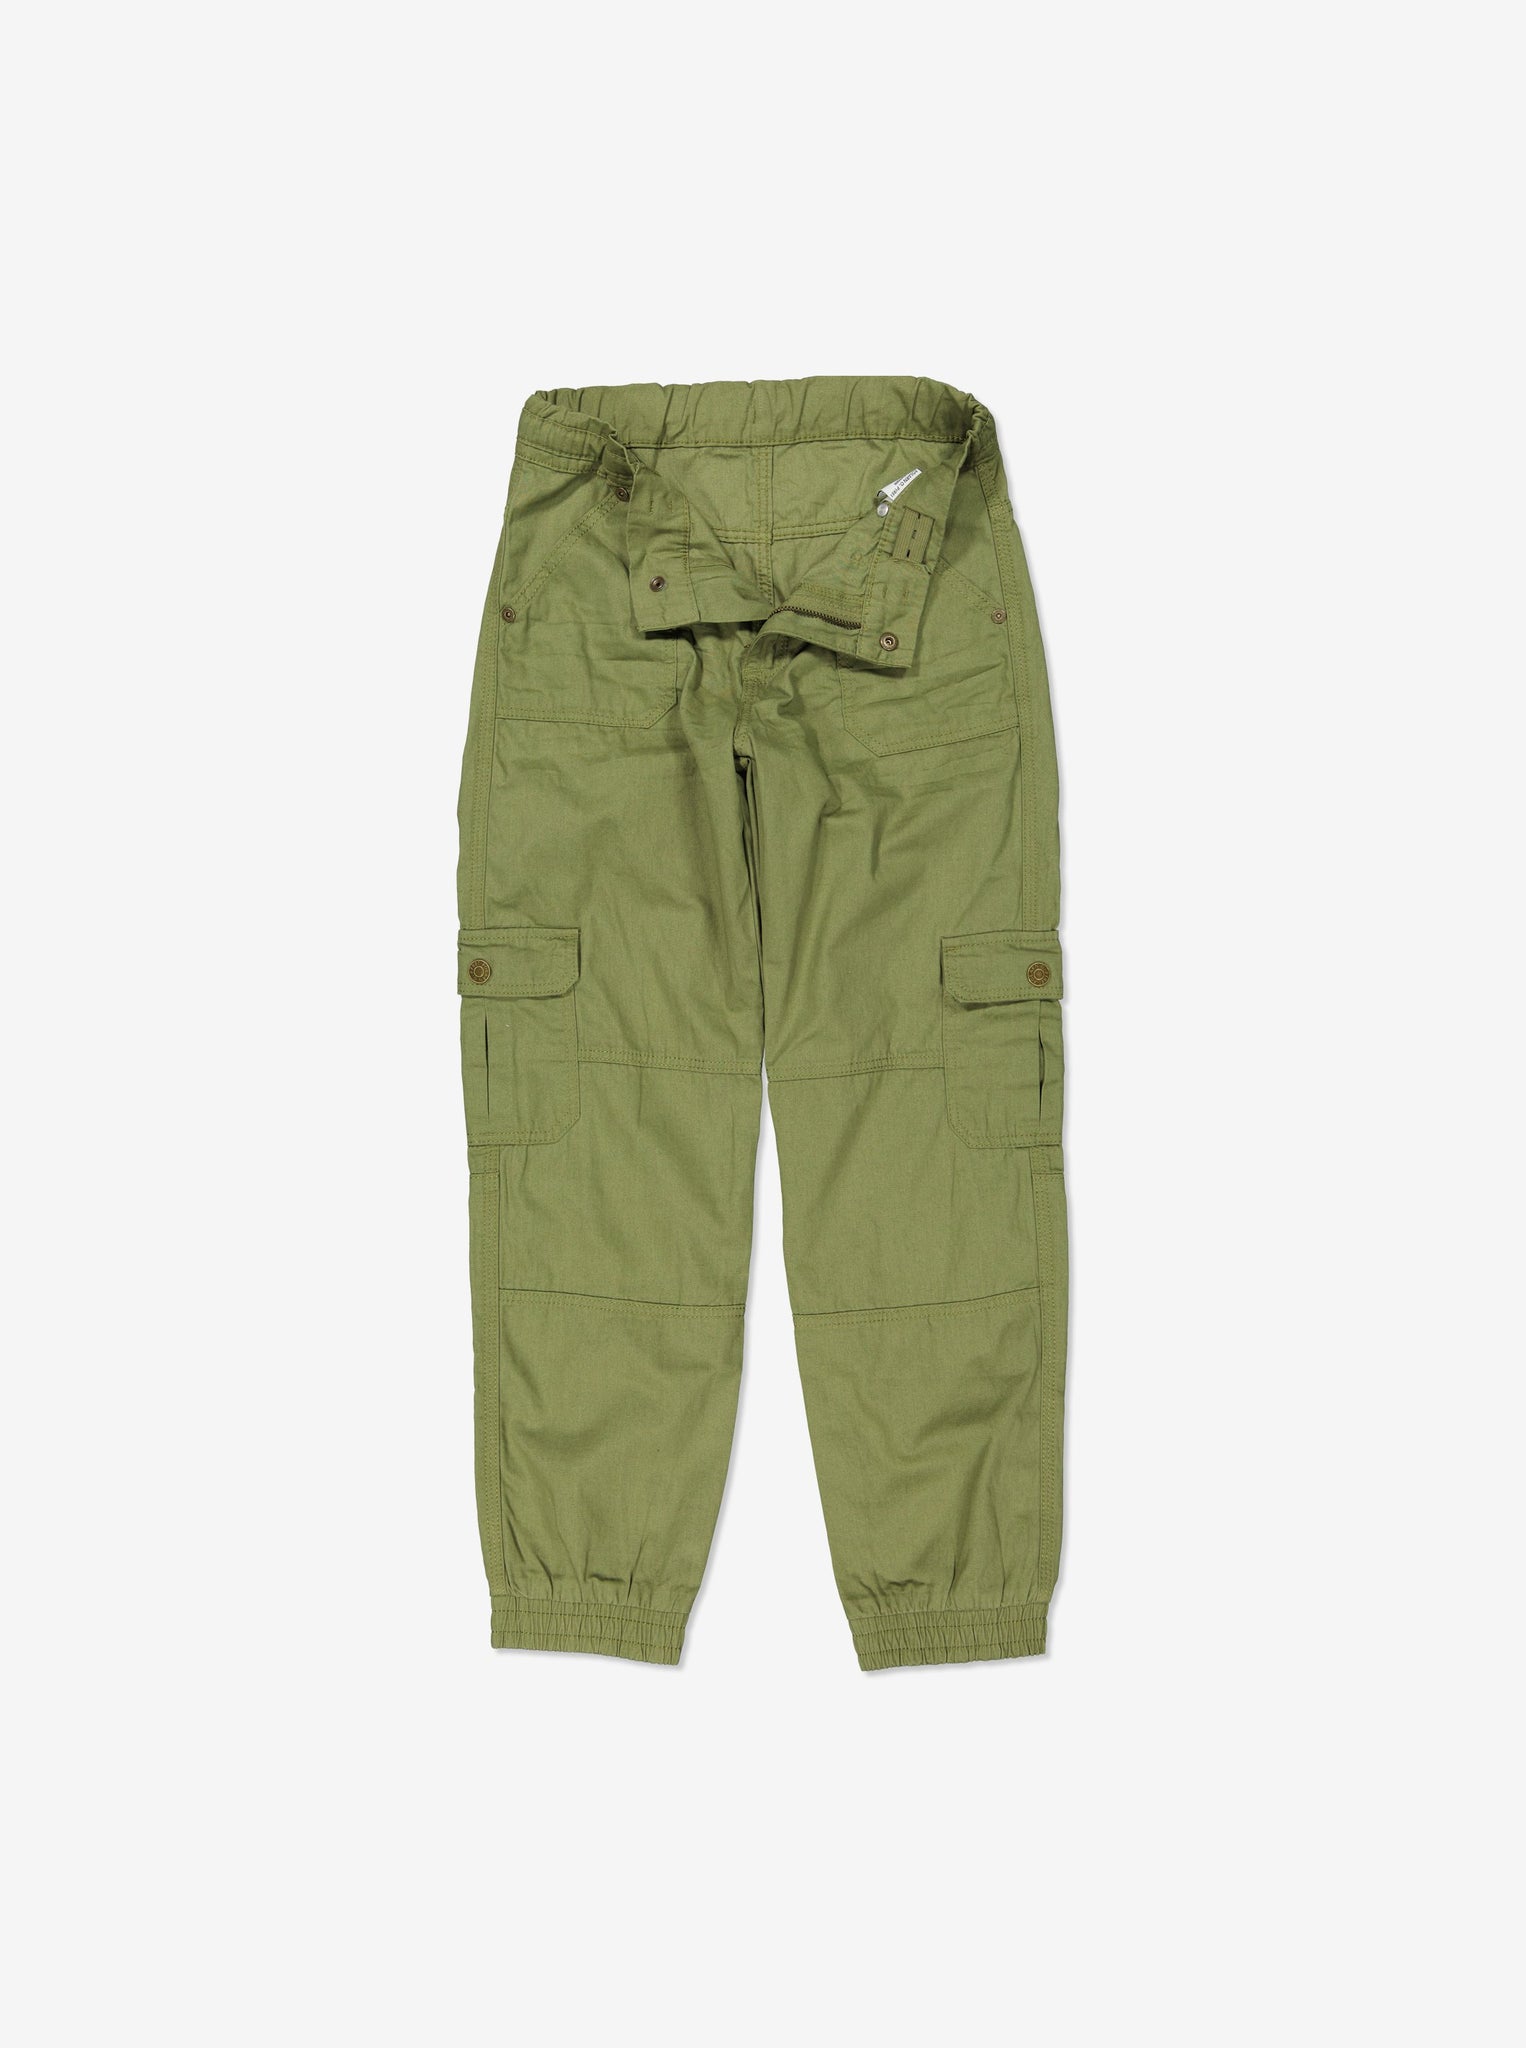  Organic Green Kids Cargo Trousers from Polarn O. Pyret Kidswear. Made with 100% organic cotton.